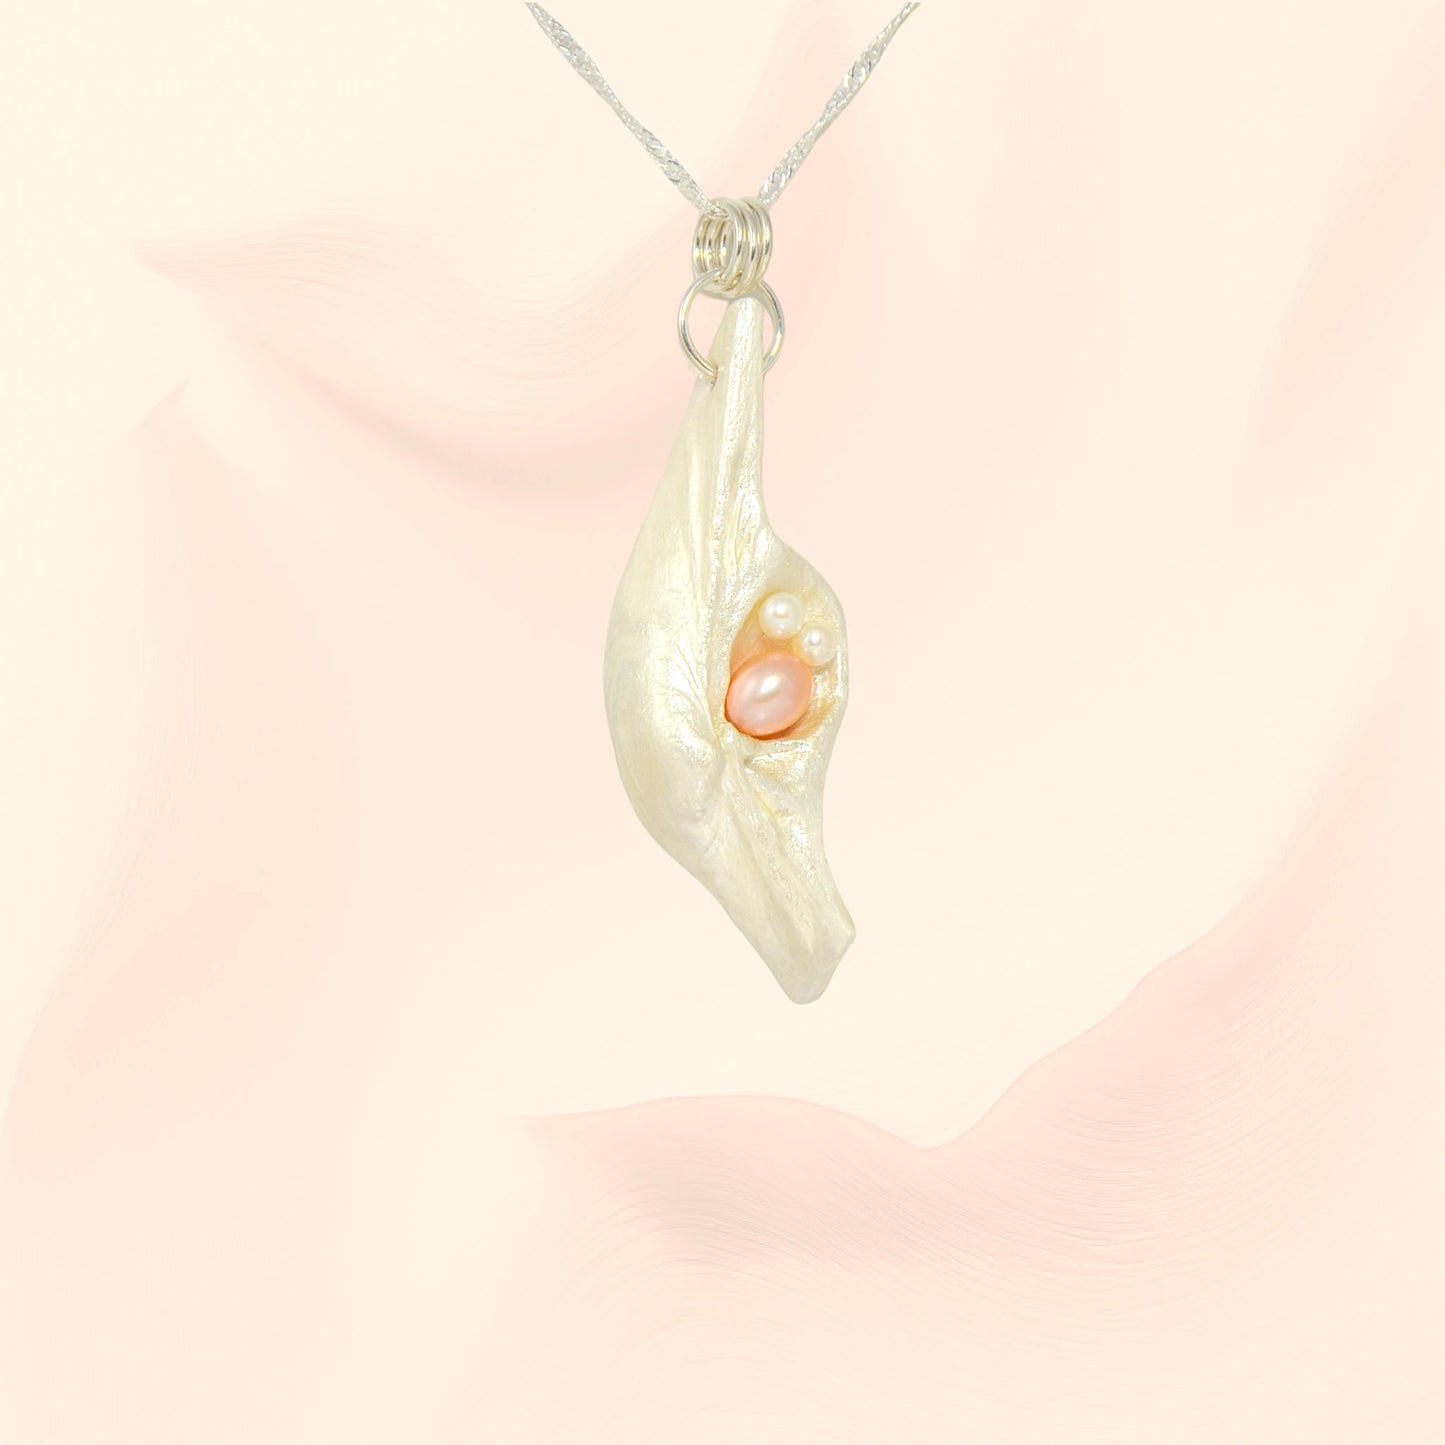 This natural seashell pendant has a real 7-8mm pink freshwater pearl and two baby pearls.